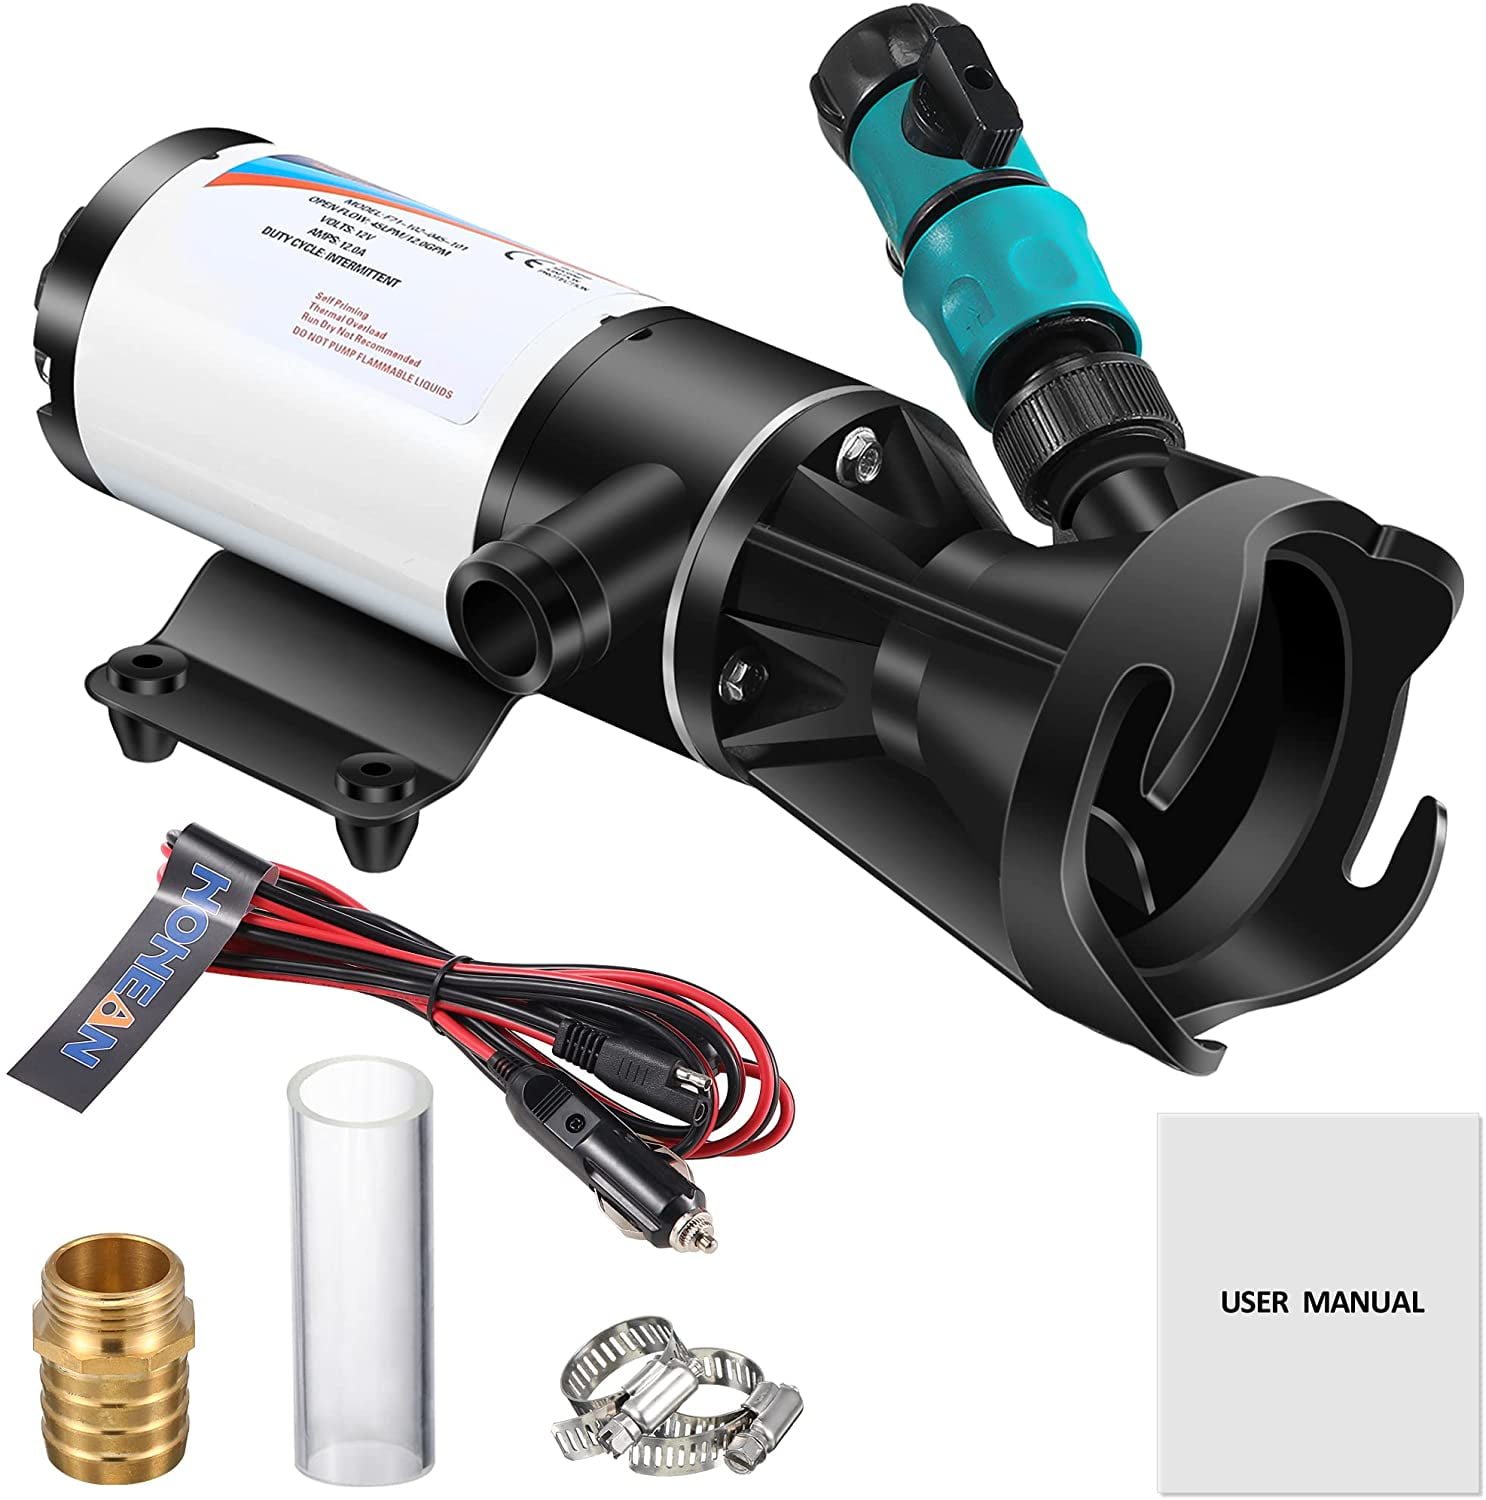 Garden Sprinklers Sprayer Replace 18555000A RV Sewer Macerator Waste Water Pump 12V DC Macerator waste Pump 12GPM Quick Release Compatible with The Camper 